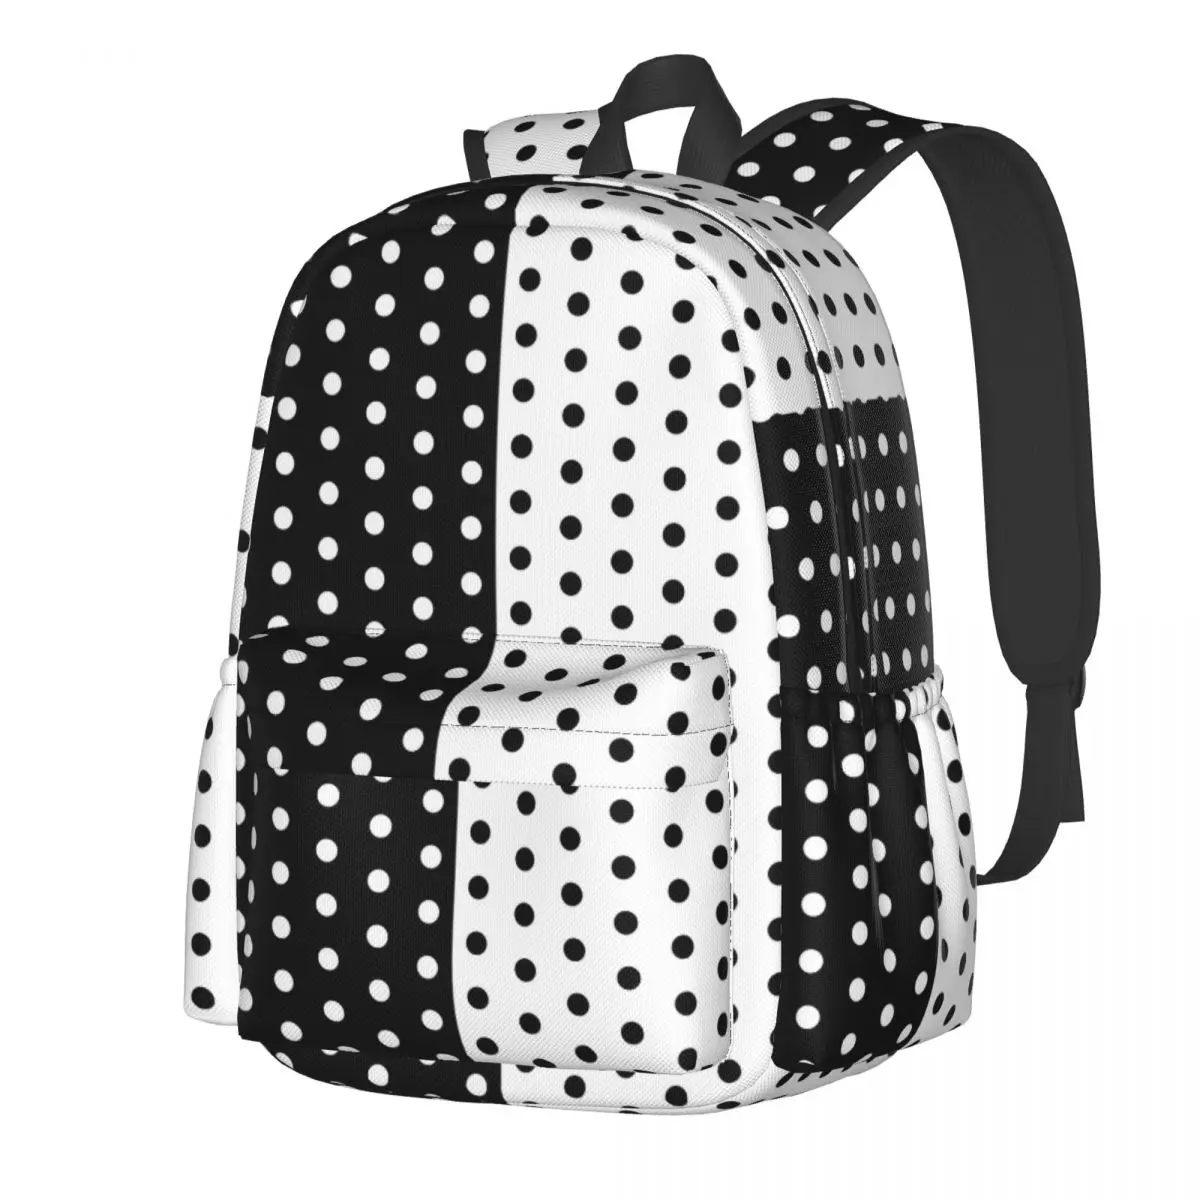 

Two Tone Spotted Backpack Black And White Travel Backpacks Girl Colorful Pattern High School Bags Streetwear Rucksack